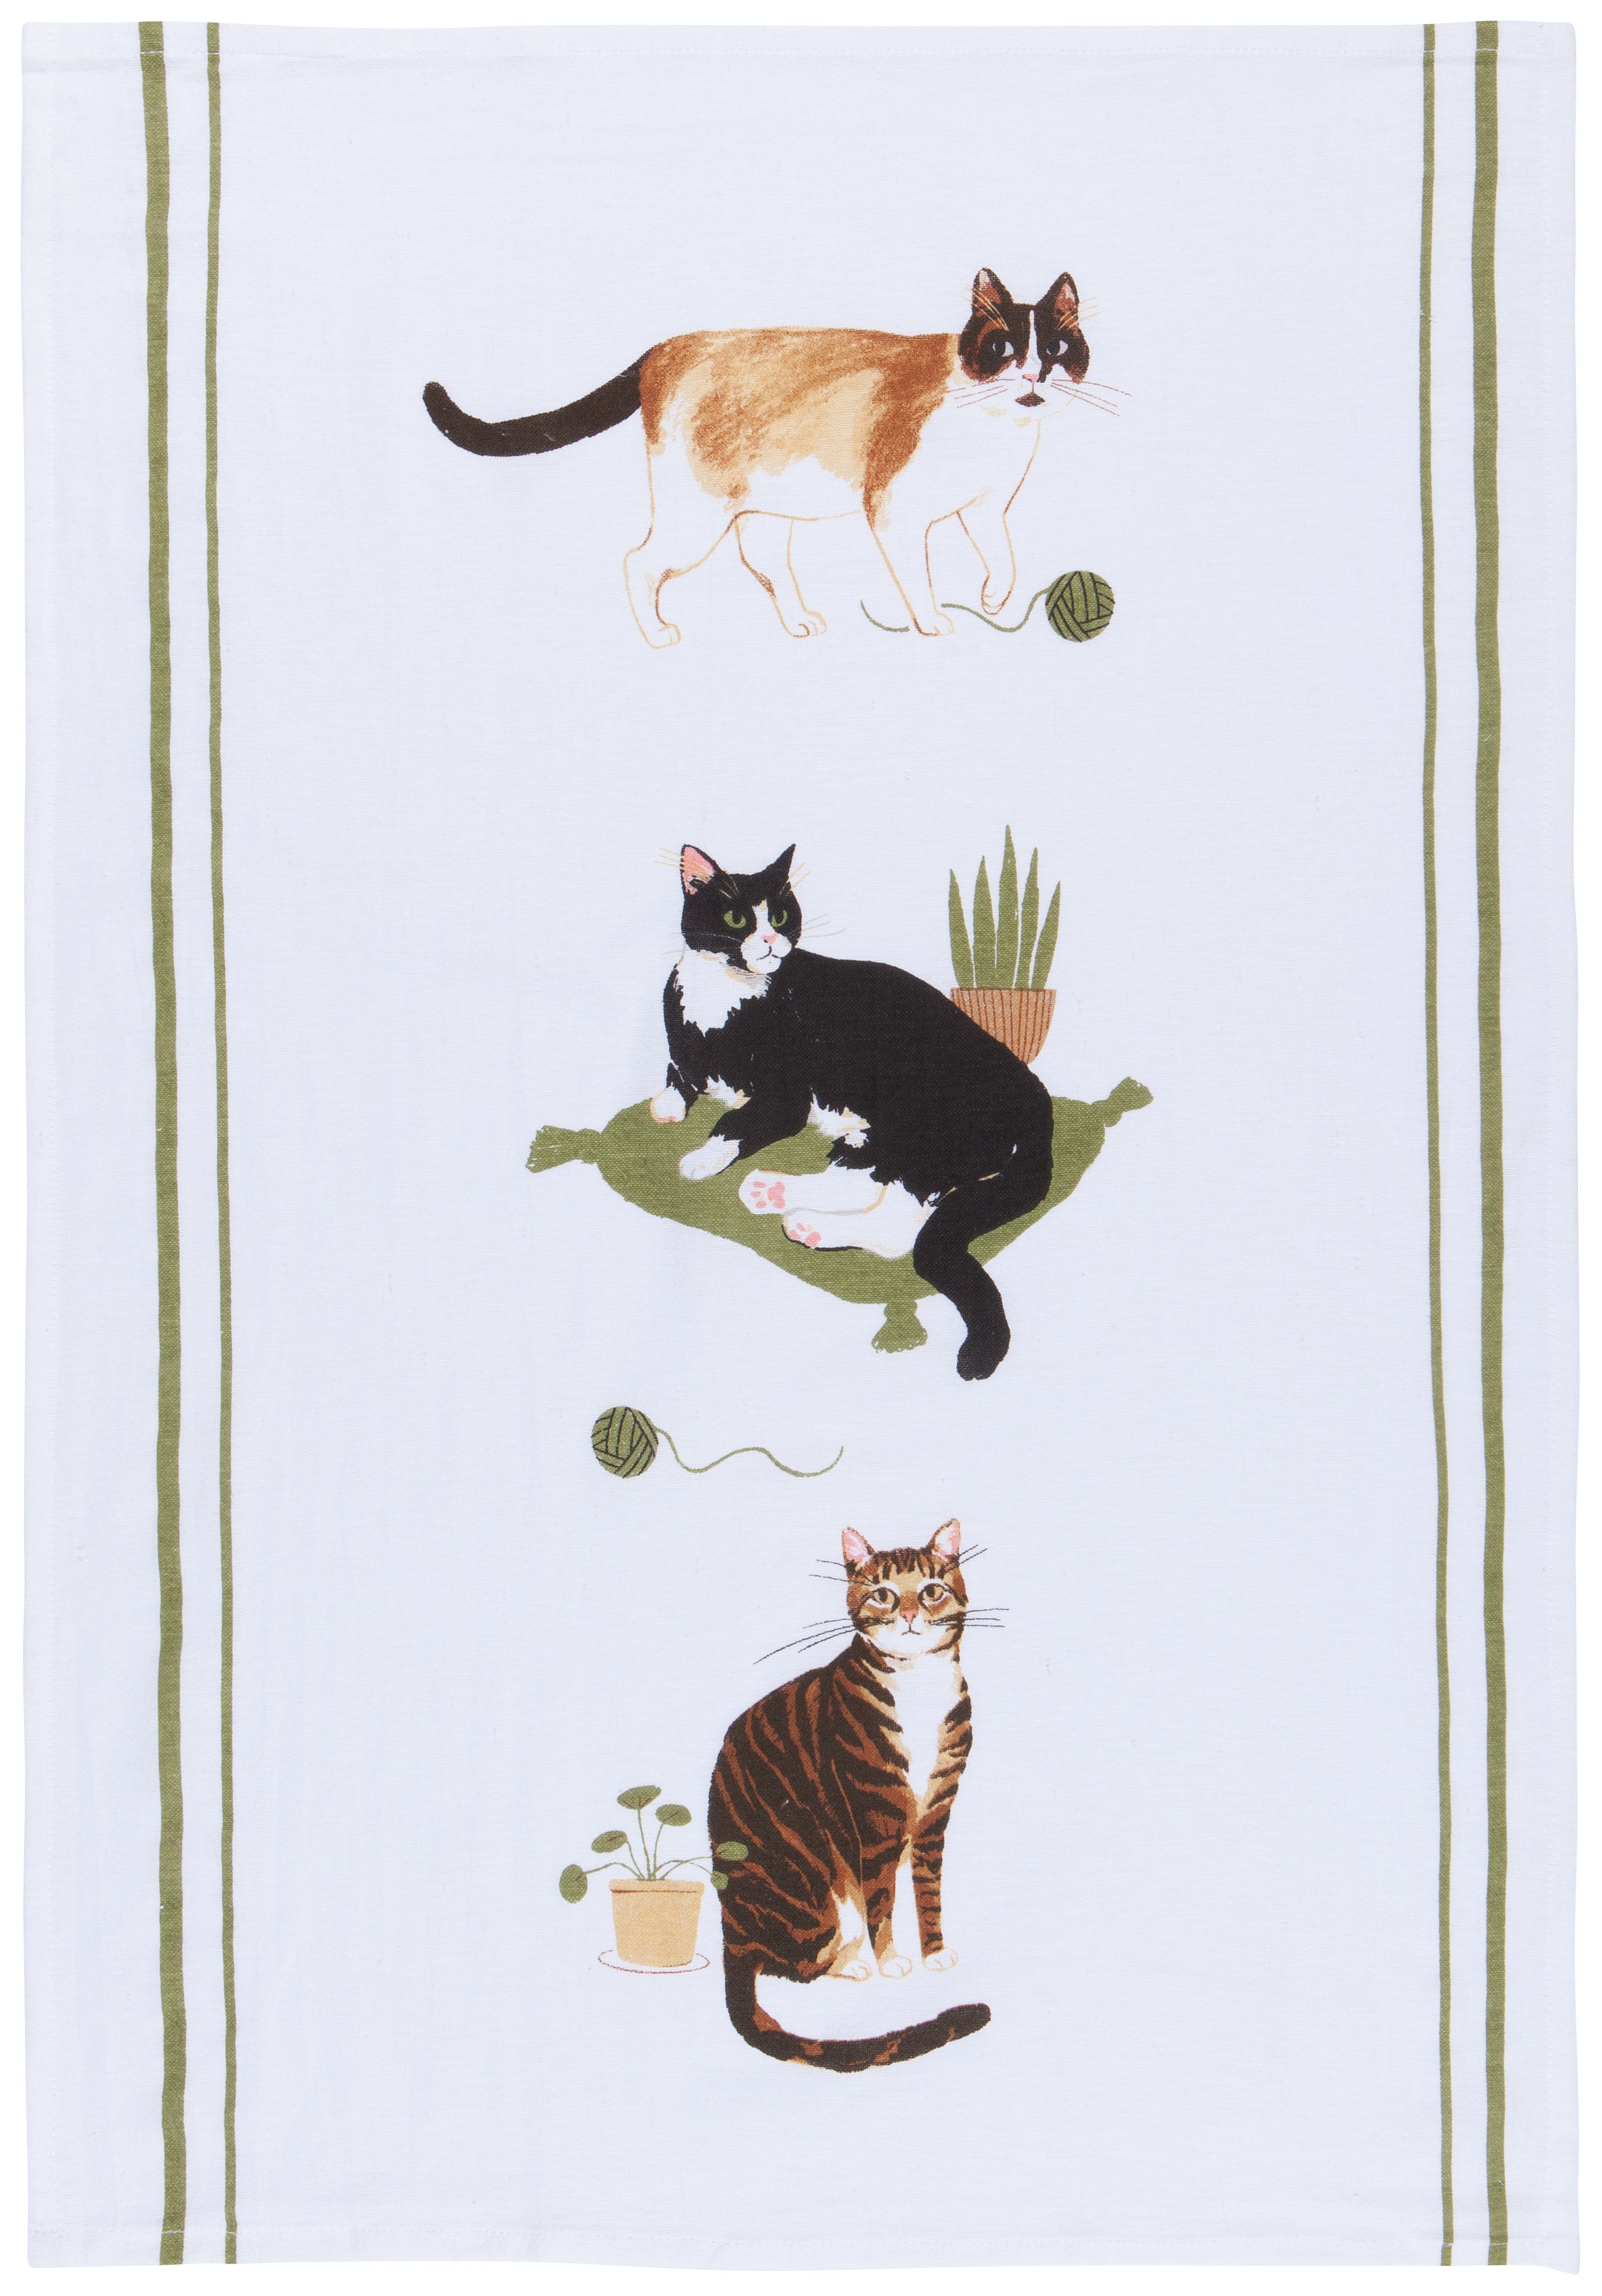 Autumn Plaid Kitchen Tea Towels, Set of 3 – To The Nines Manitowish Waters